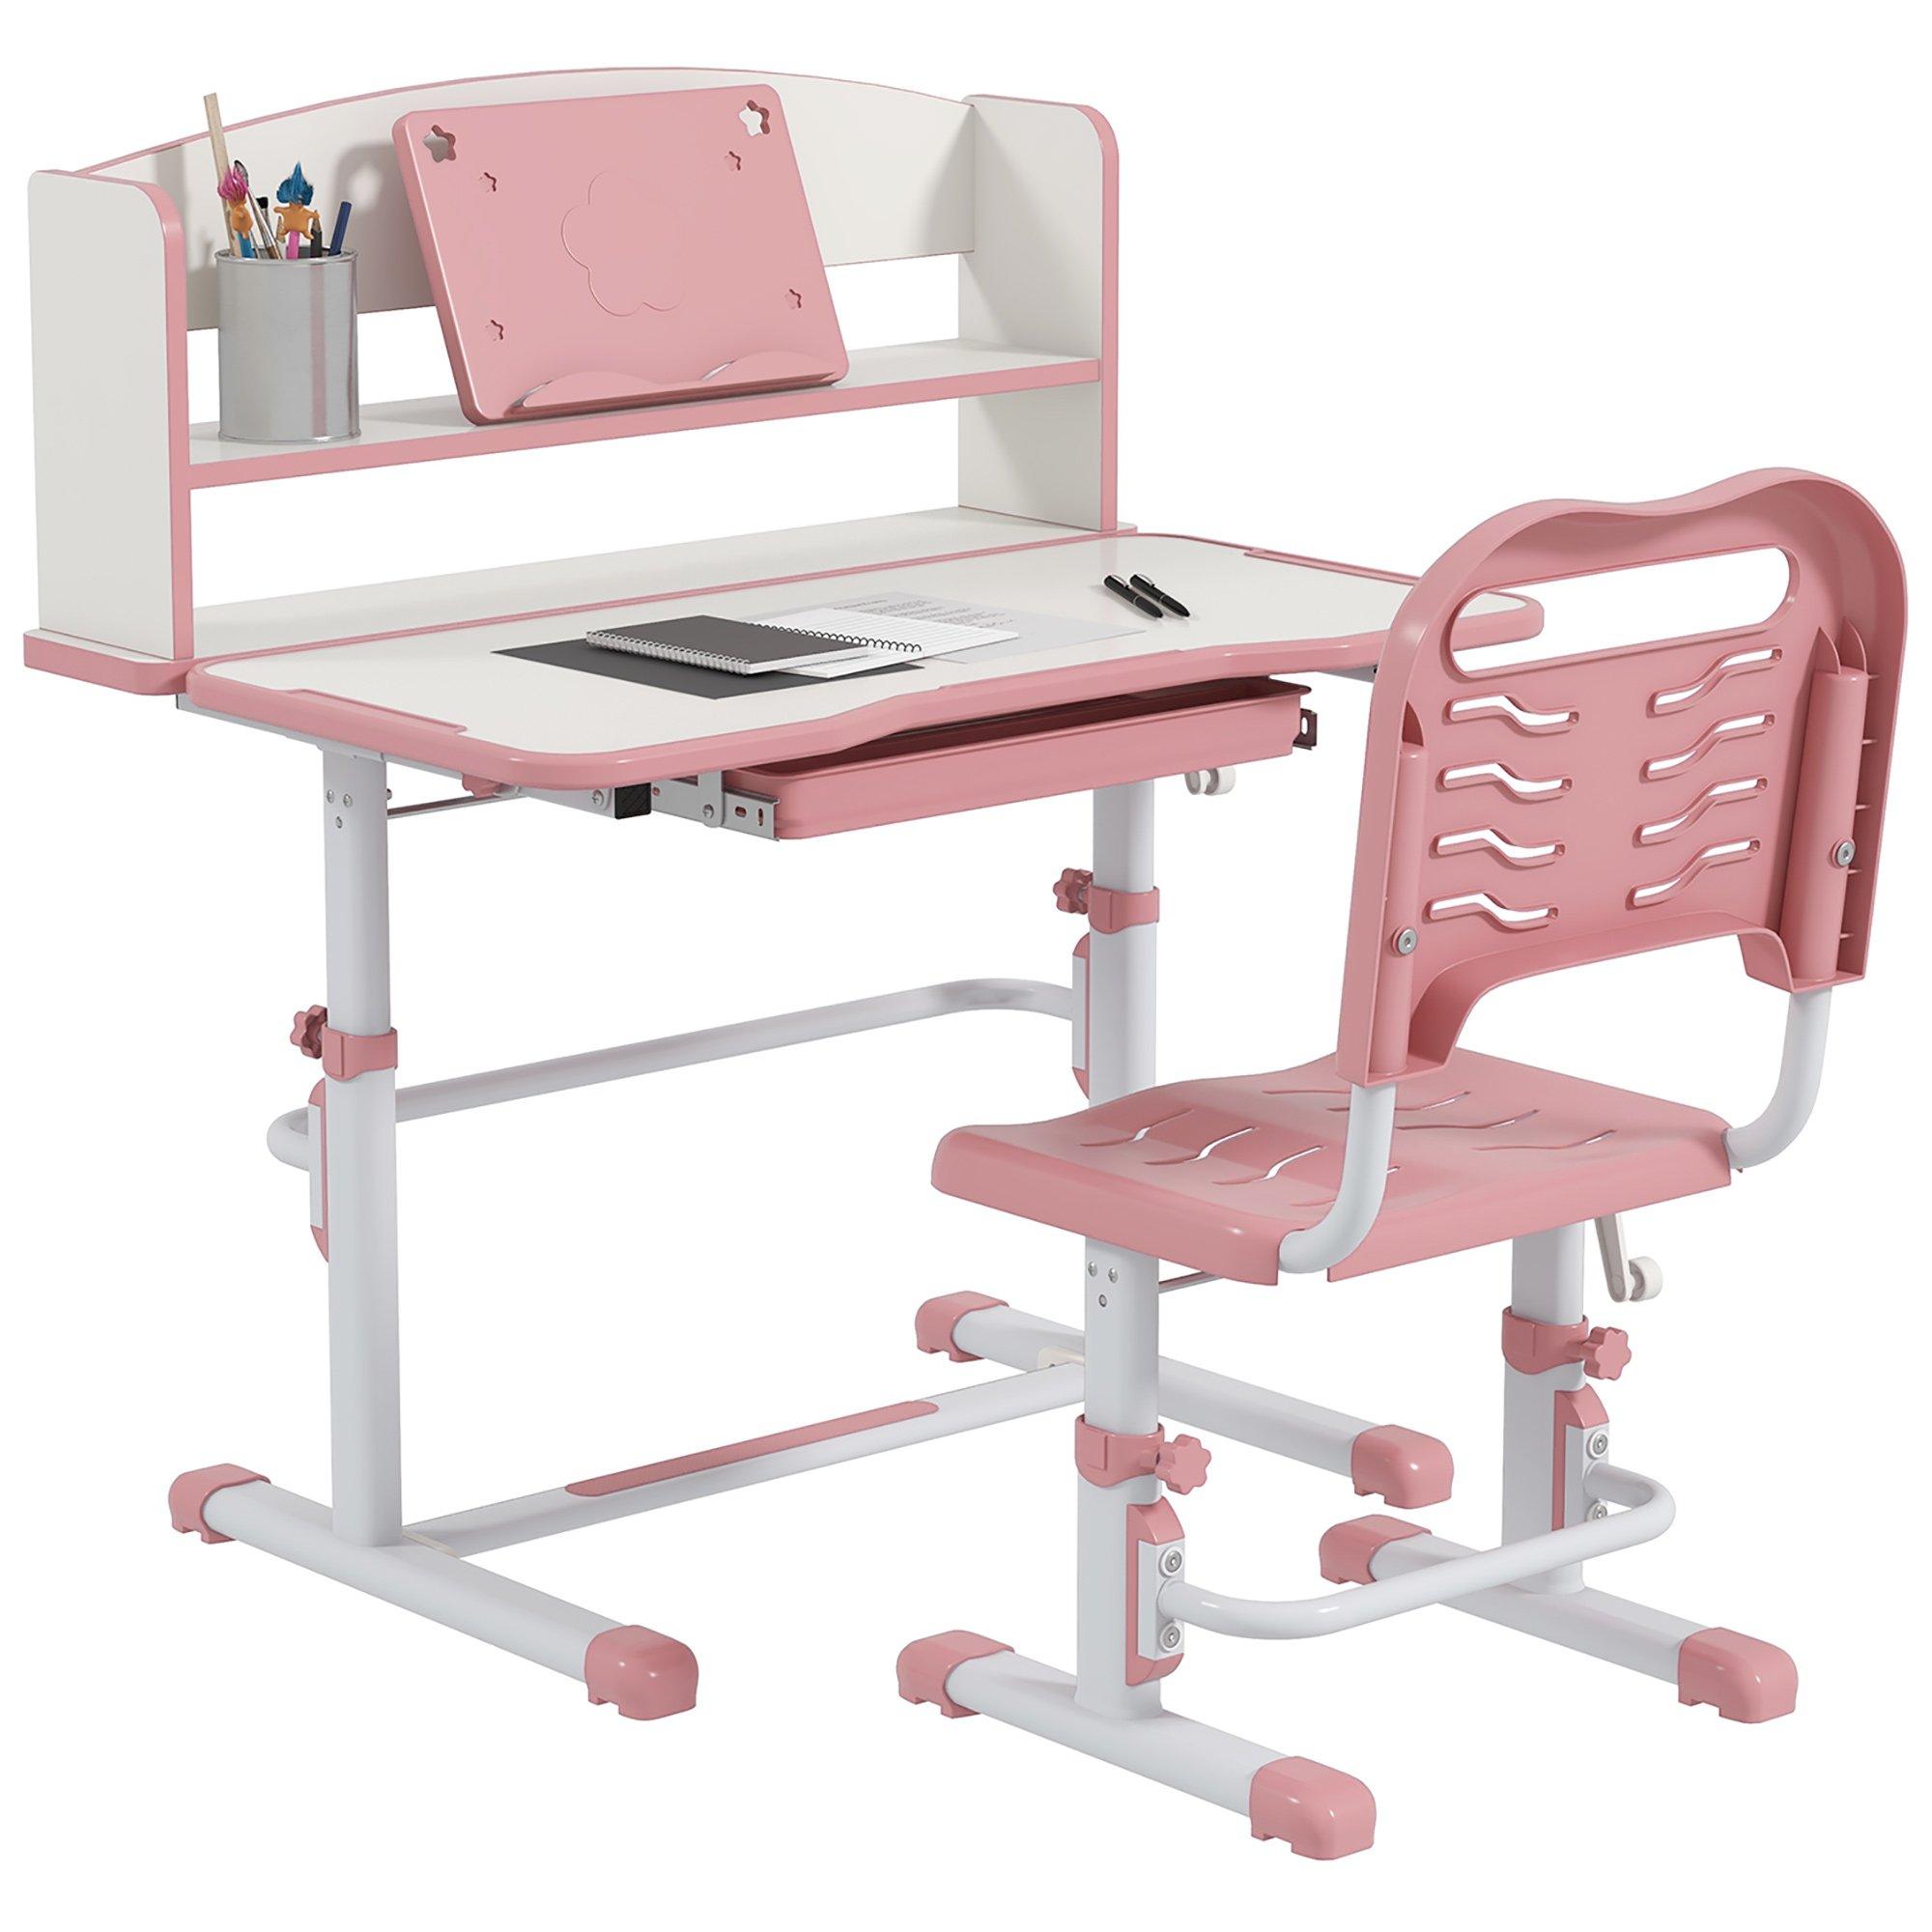 Height Adjustable Kids Desk and Chair Set with Drawer, for Ages 6-12 Years